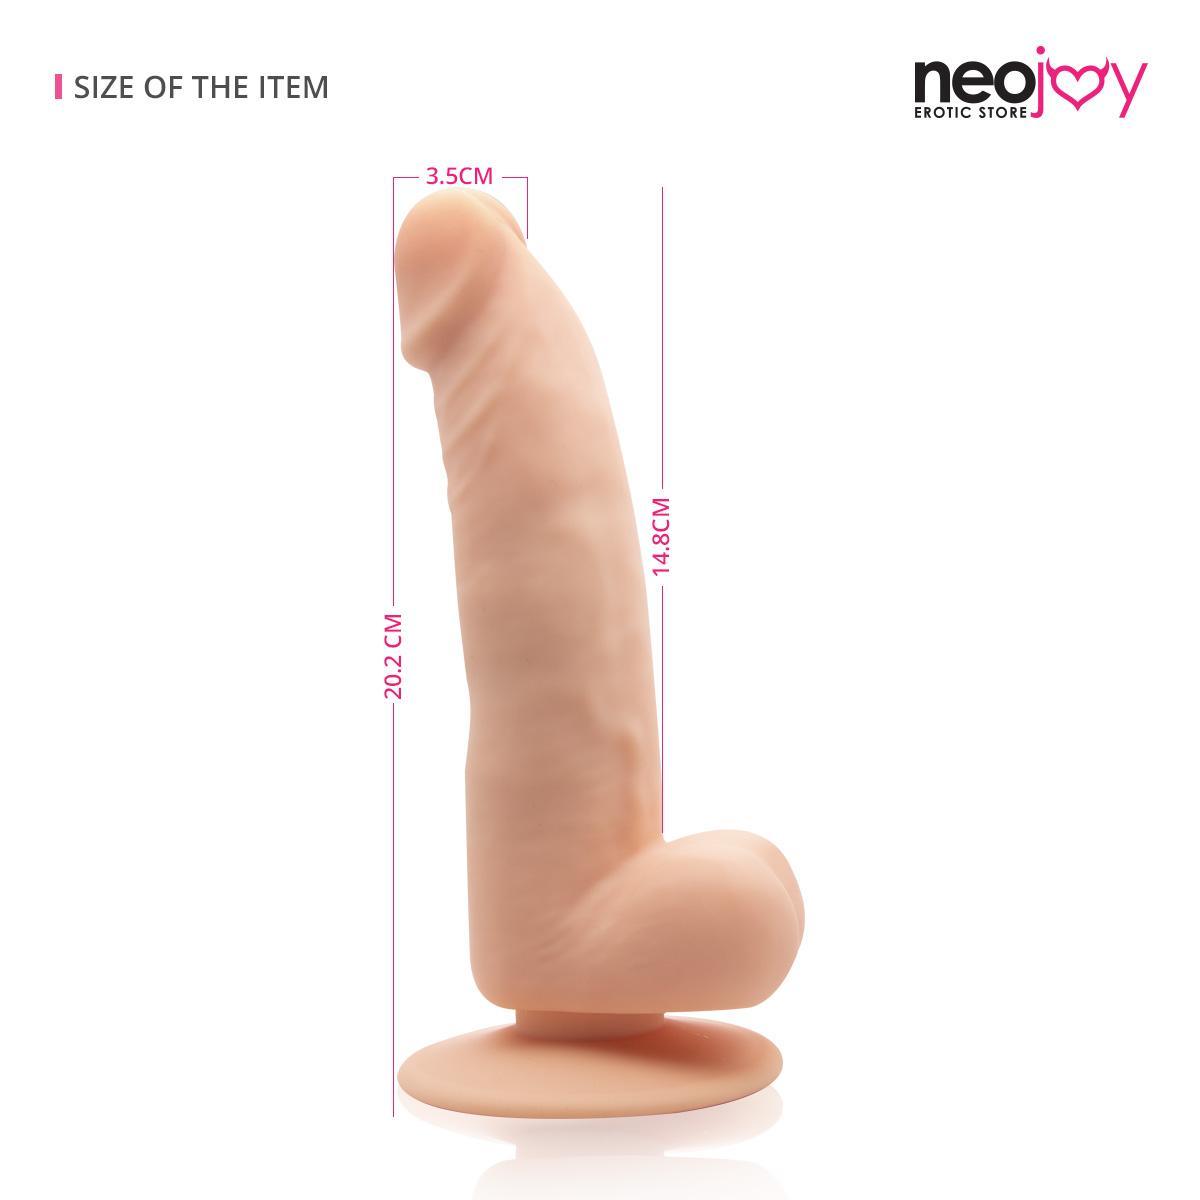 Neojoy Private Lover Silicon Rotating Vibrator Realistic Dildo With Suction Cup 15cm - 5.9 inch Dildos - lucidtoys.com Dildo vibrator sex toy love doll